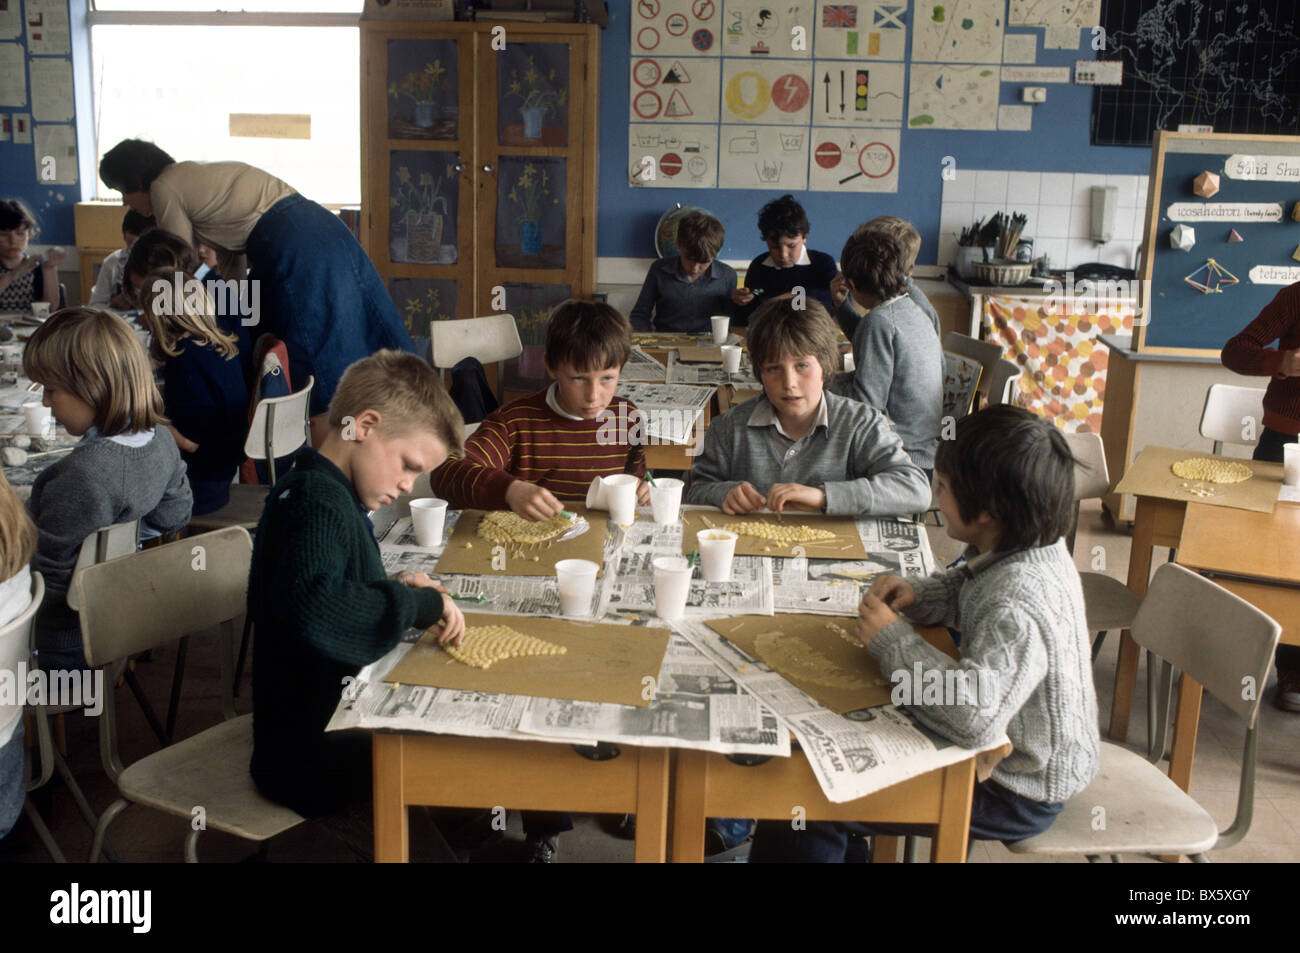 archive historical image of primary school classroom with 7 year old children creating  pictures with macaroni and glue Stock Photo